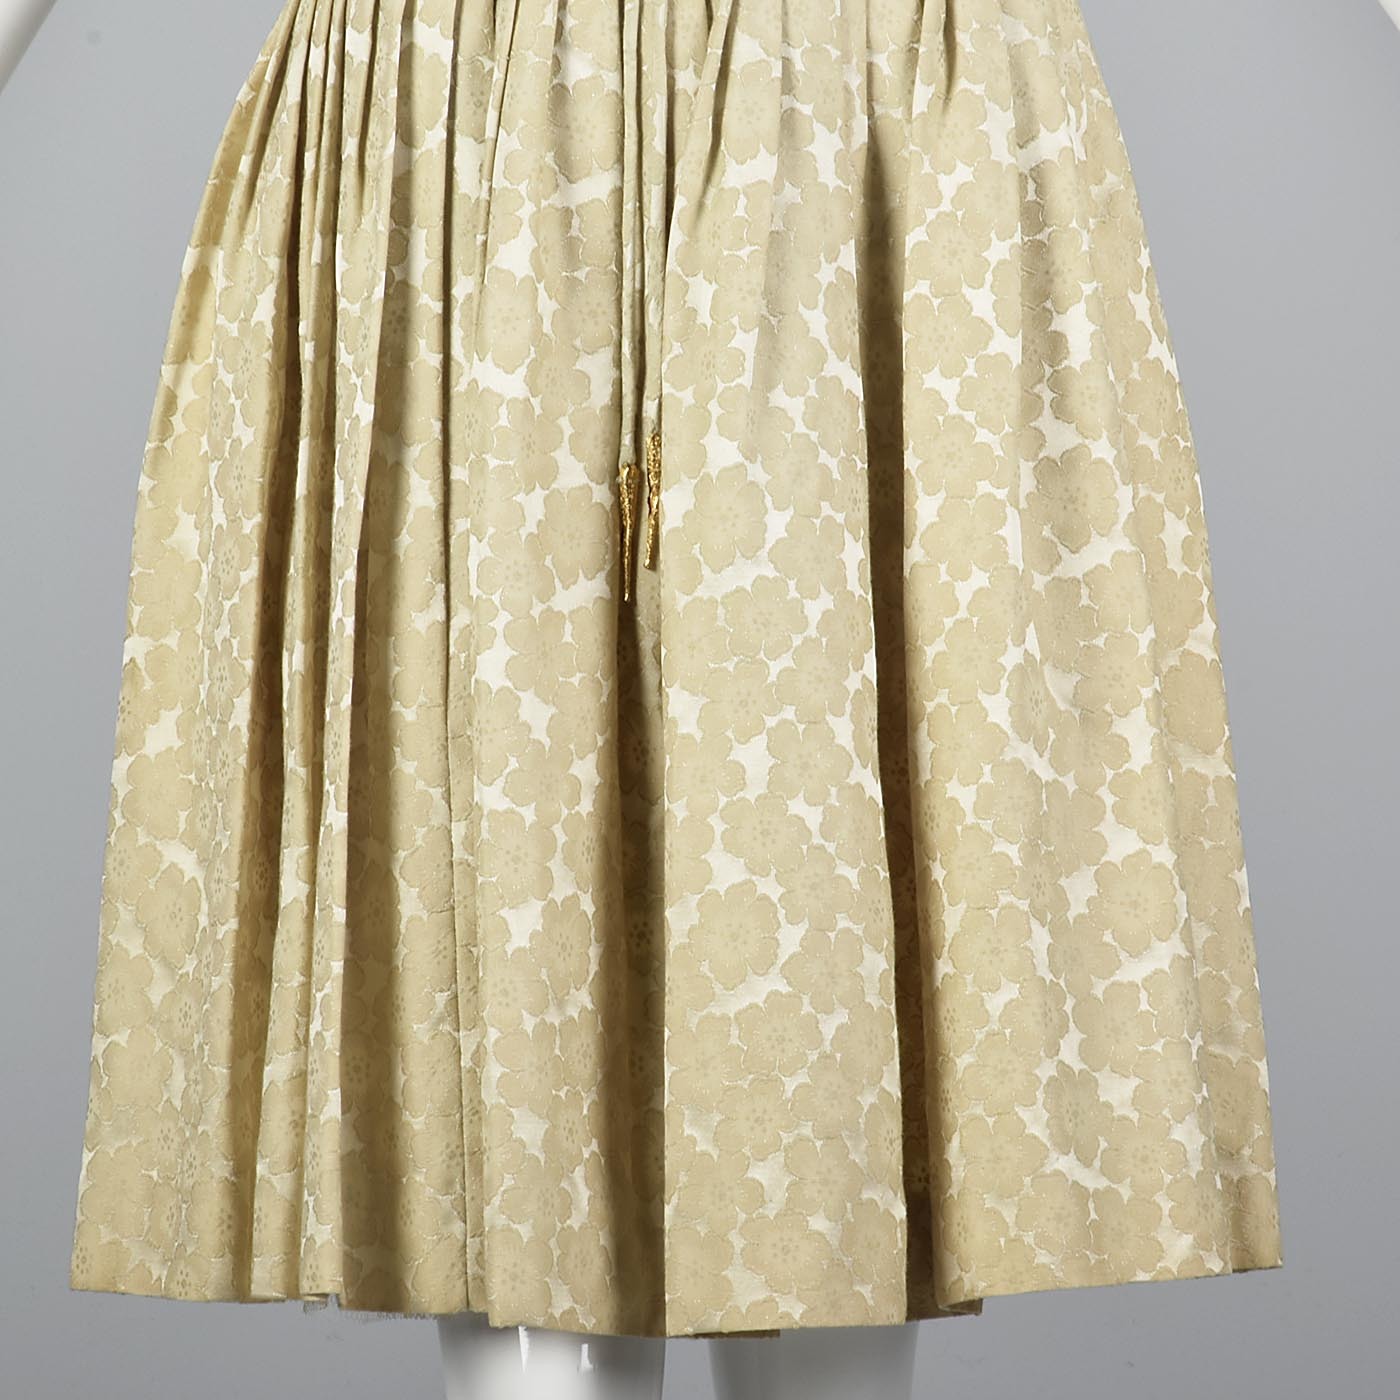 1950s Ivory Brocade Dress with Corset Illusion Front